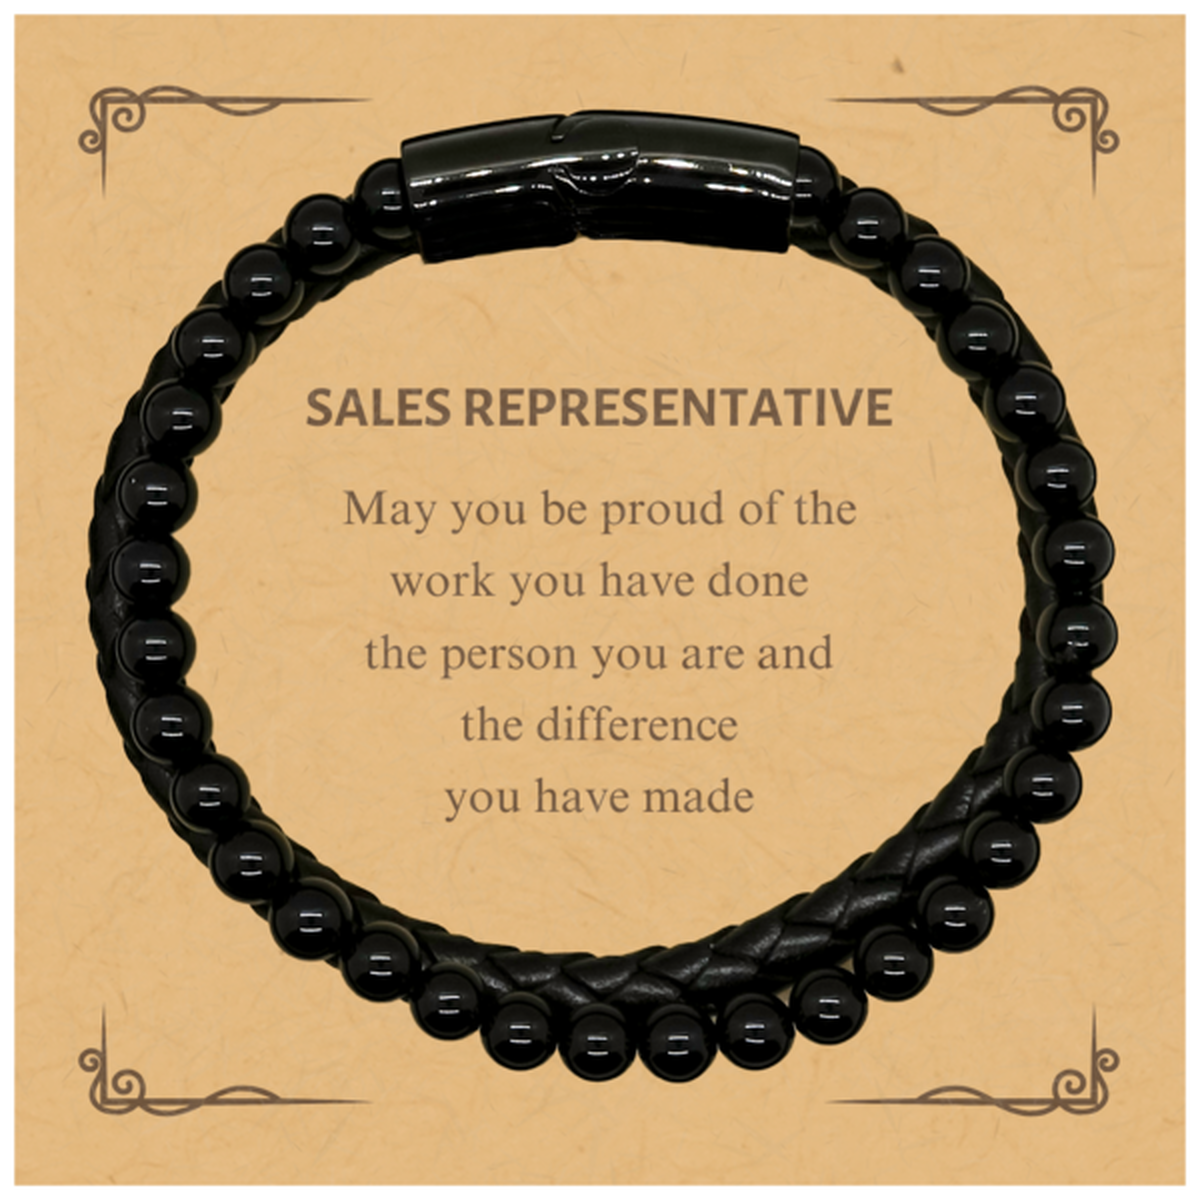 Sales Representative May you be proud of the work you have done, Retirement Sales Representative Stone Leather Bracelets for Colleague Appreciation Gifts Amazing for Sales Representative